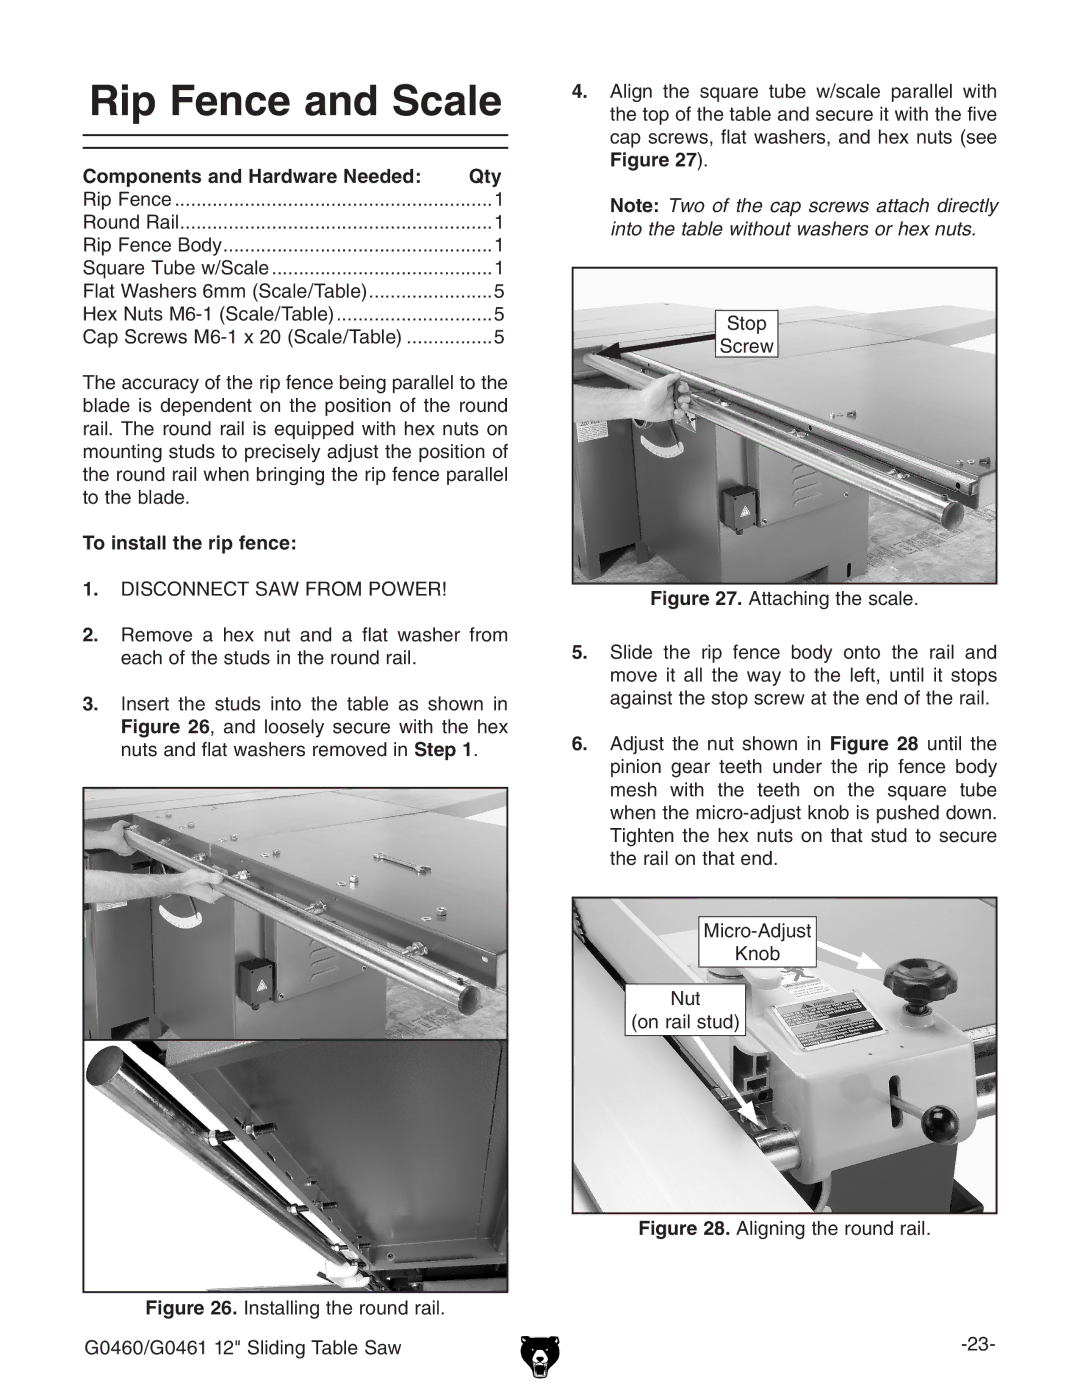 Grizzly G0461, G0460 owner manual Rip Fence and Scale, To install the rip fence 